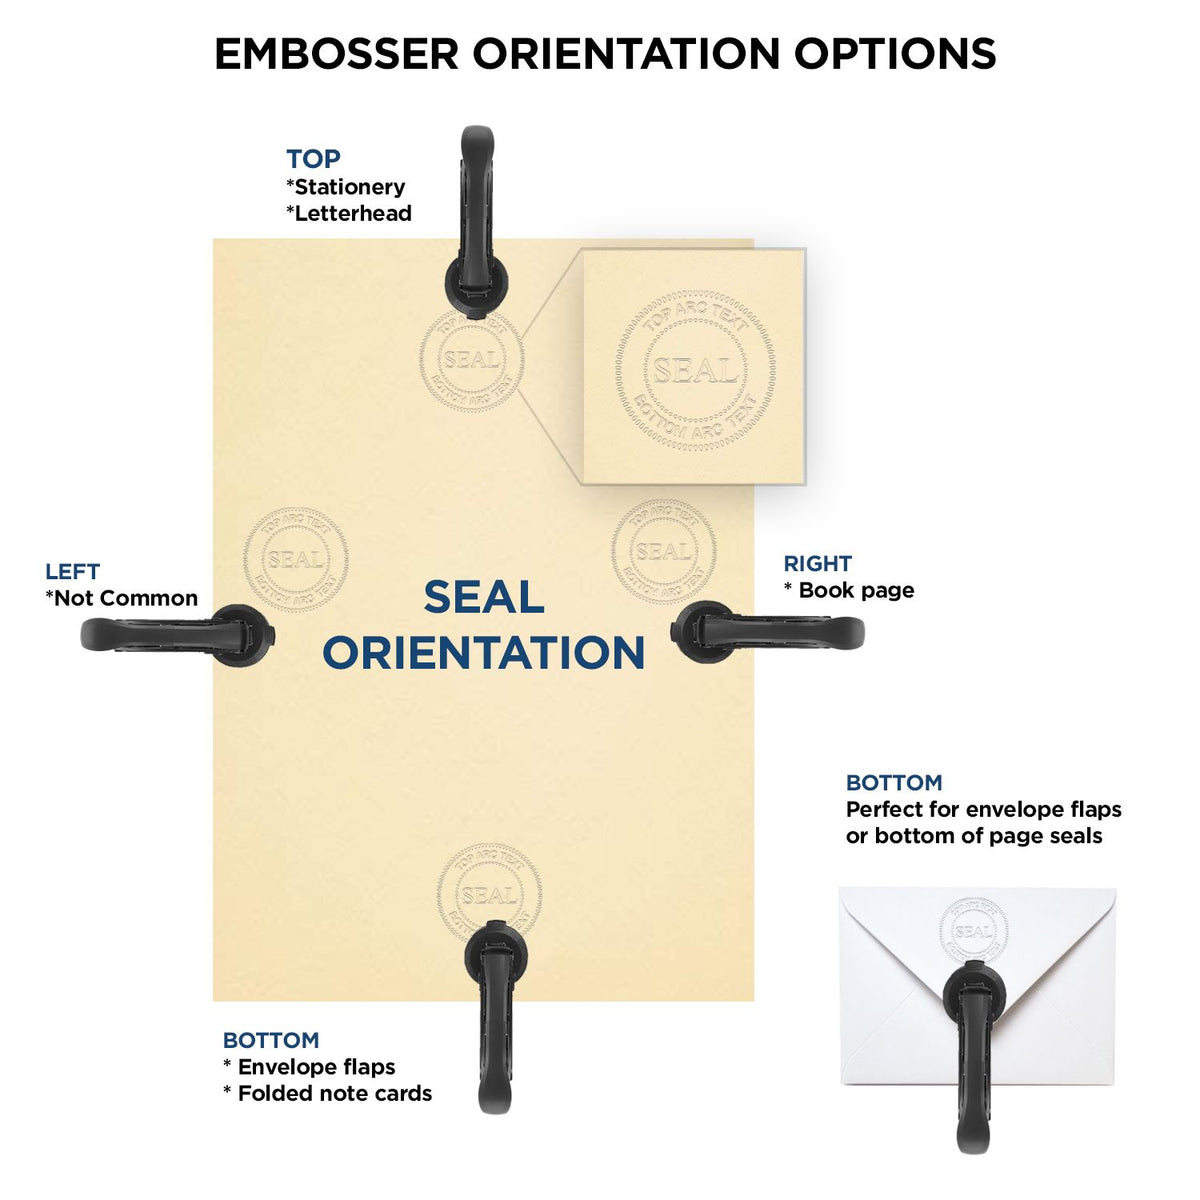 An infographic for the Long Reach Maryland PE Seal showing embosser orientation, this is showing examples of a top, bottom, right and left insert.